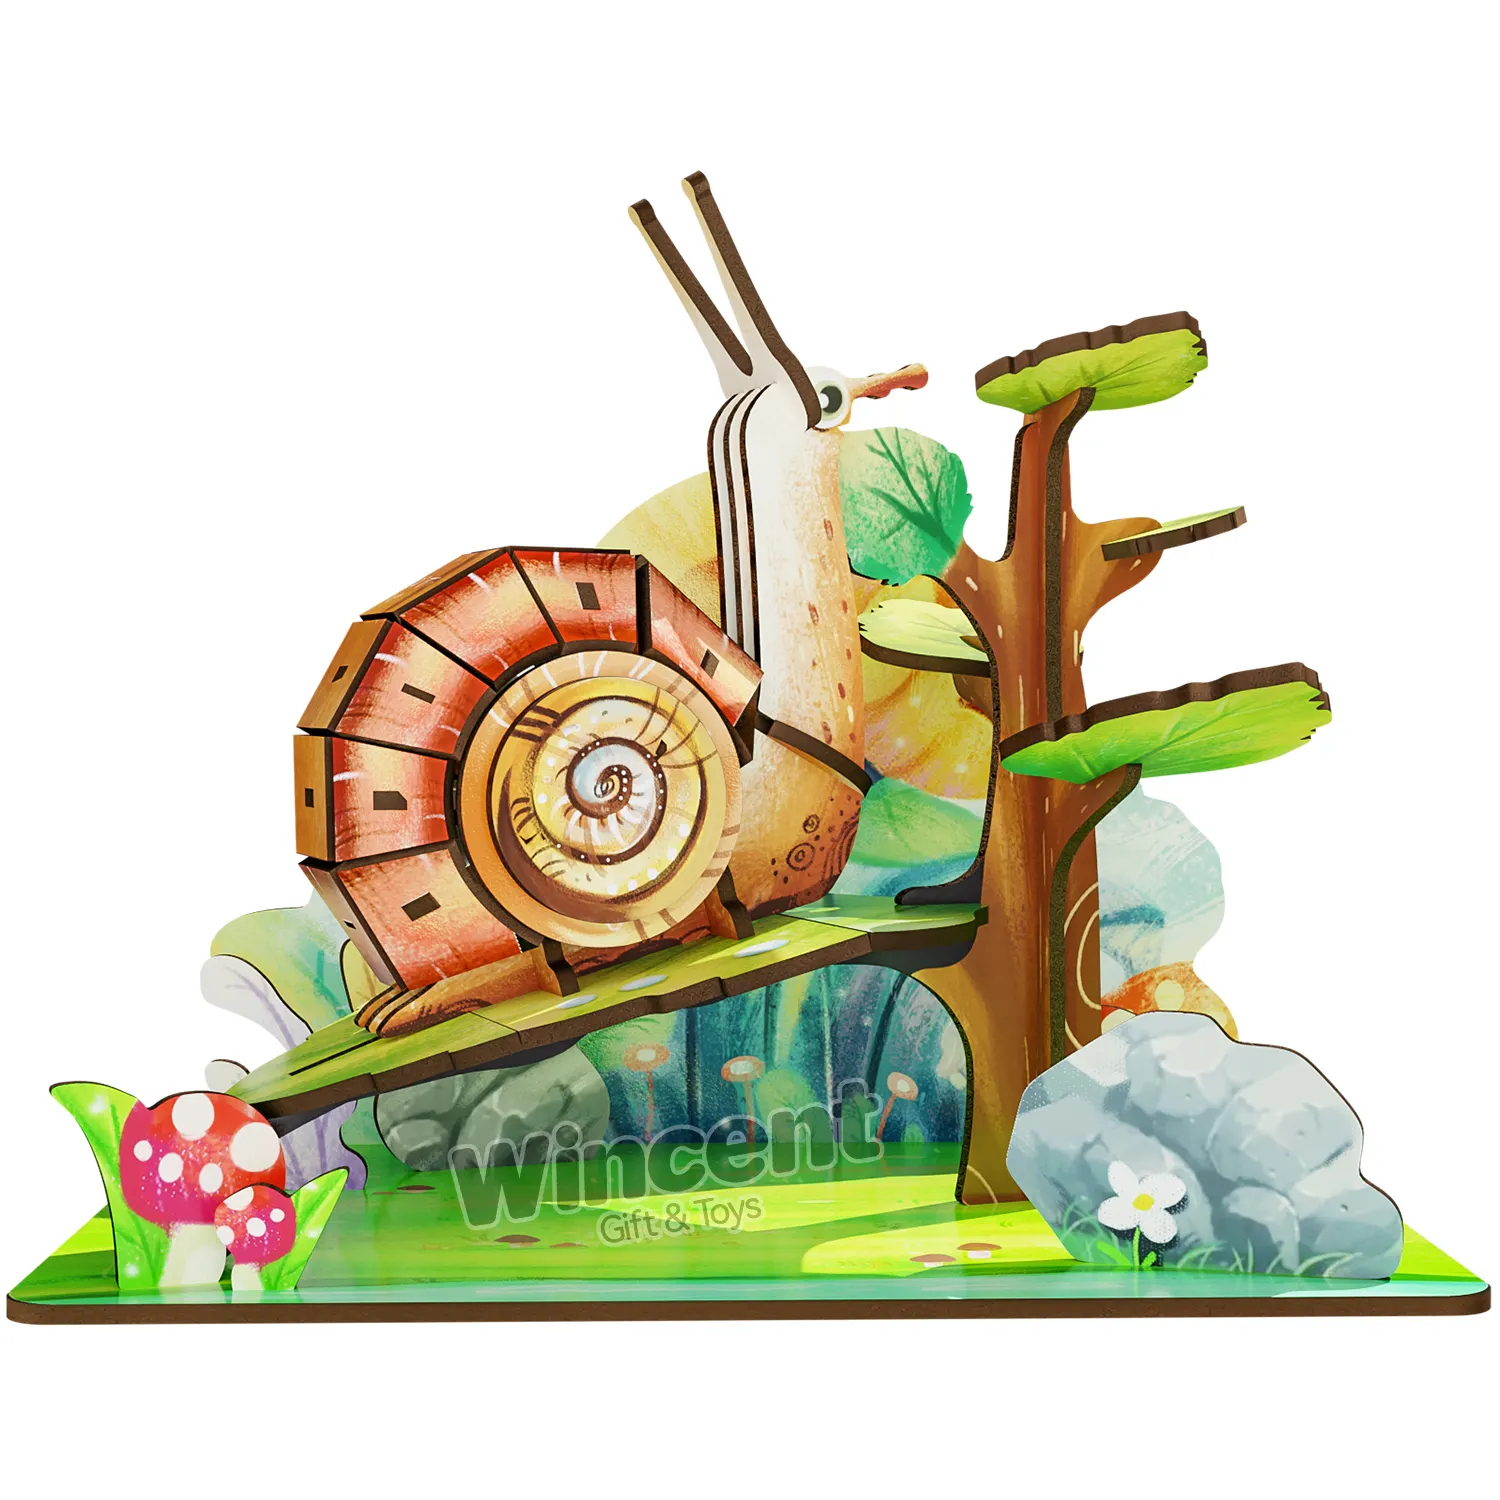 New Shape Postcards Puzzles Small Wood Animal Wooden Puzzle Gift For Kids And Adults Toys